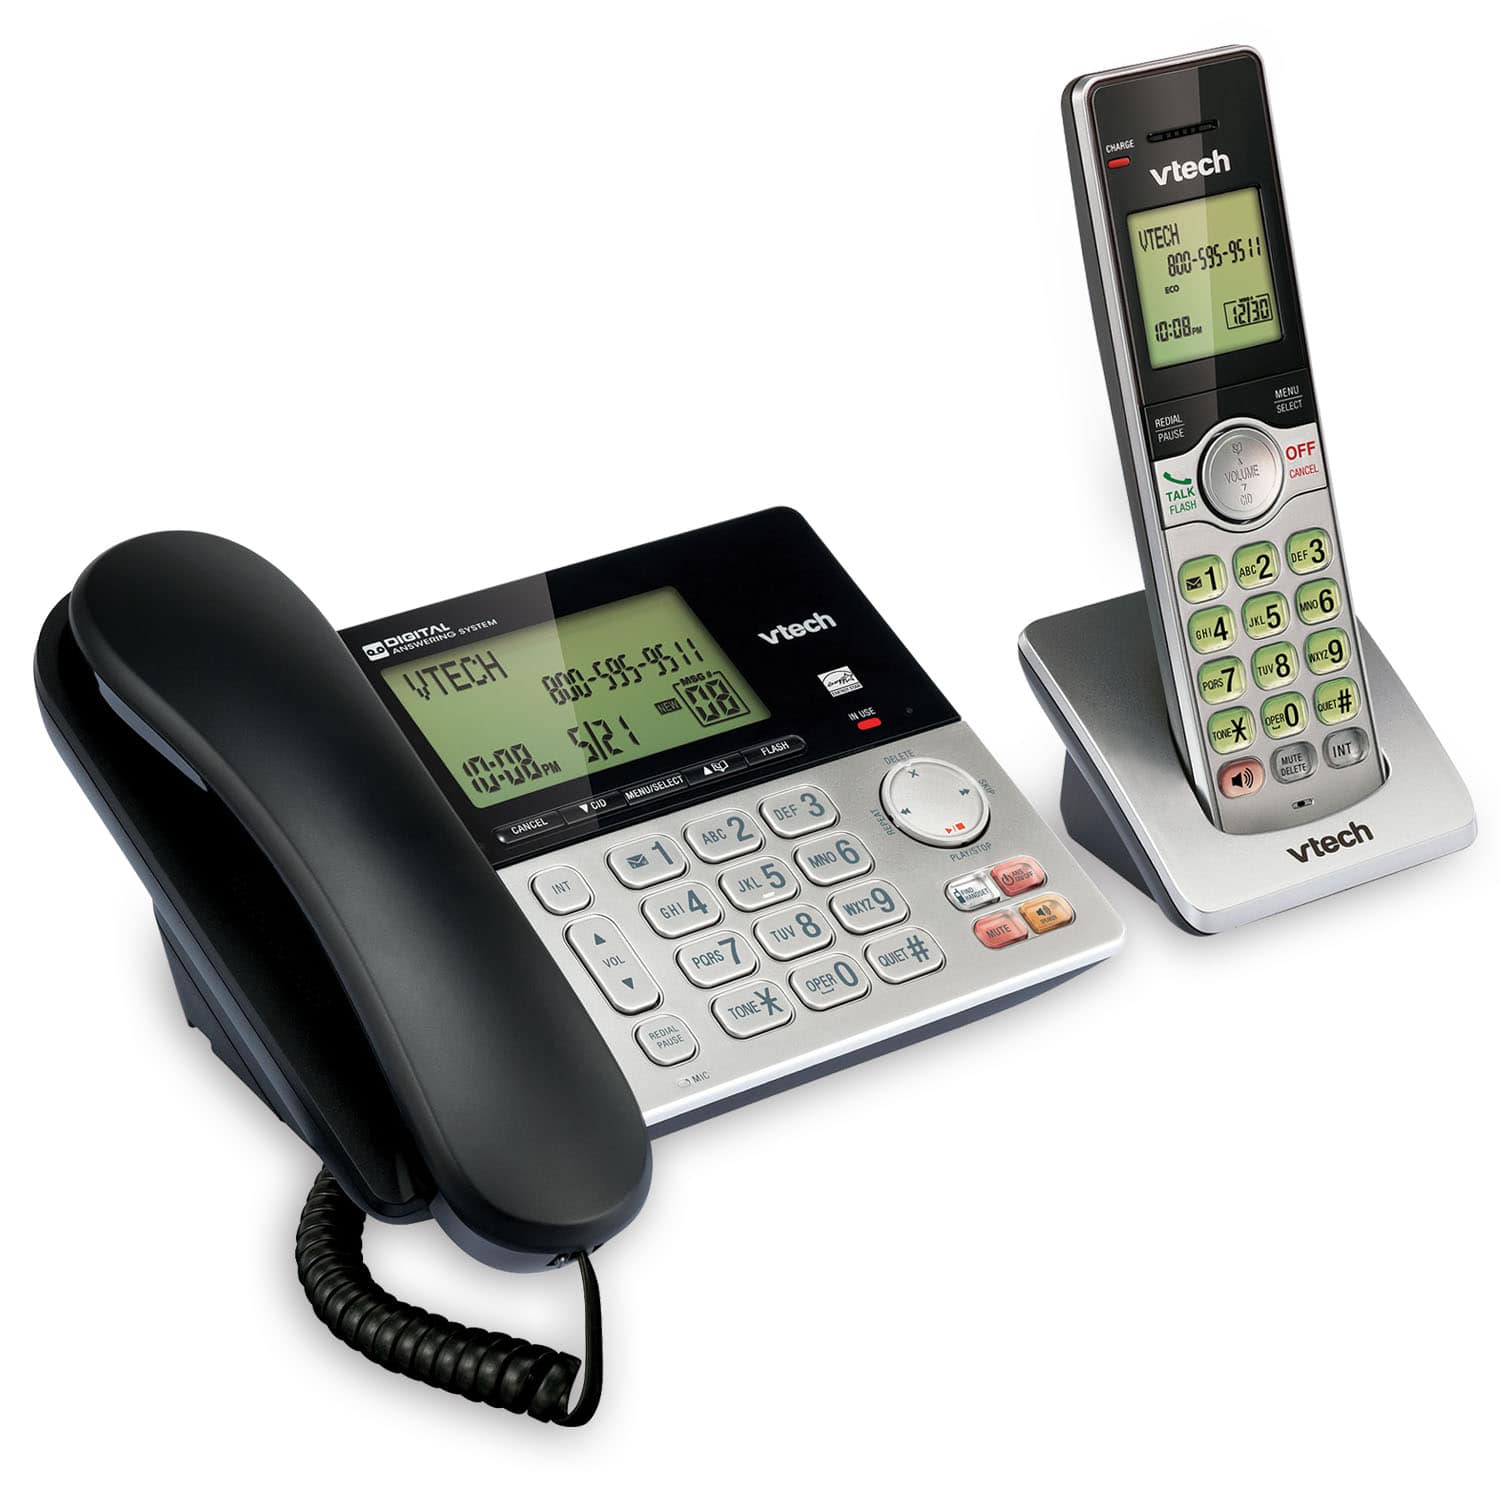 VTech CS6649 Expandable Corded/Cordless Phone w/ Answering System Expandable 